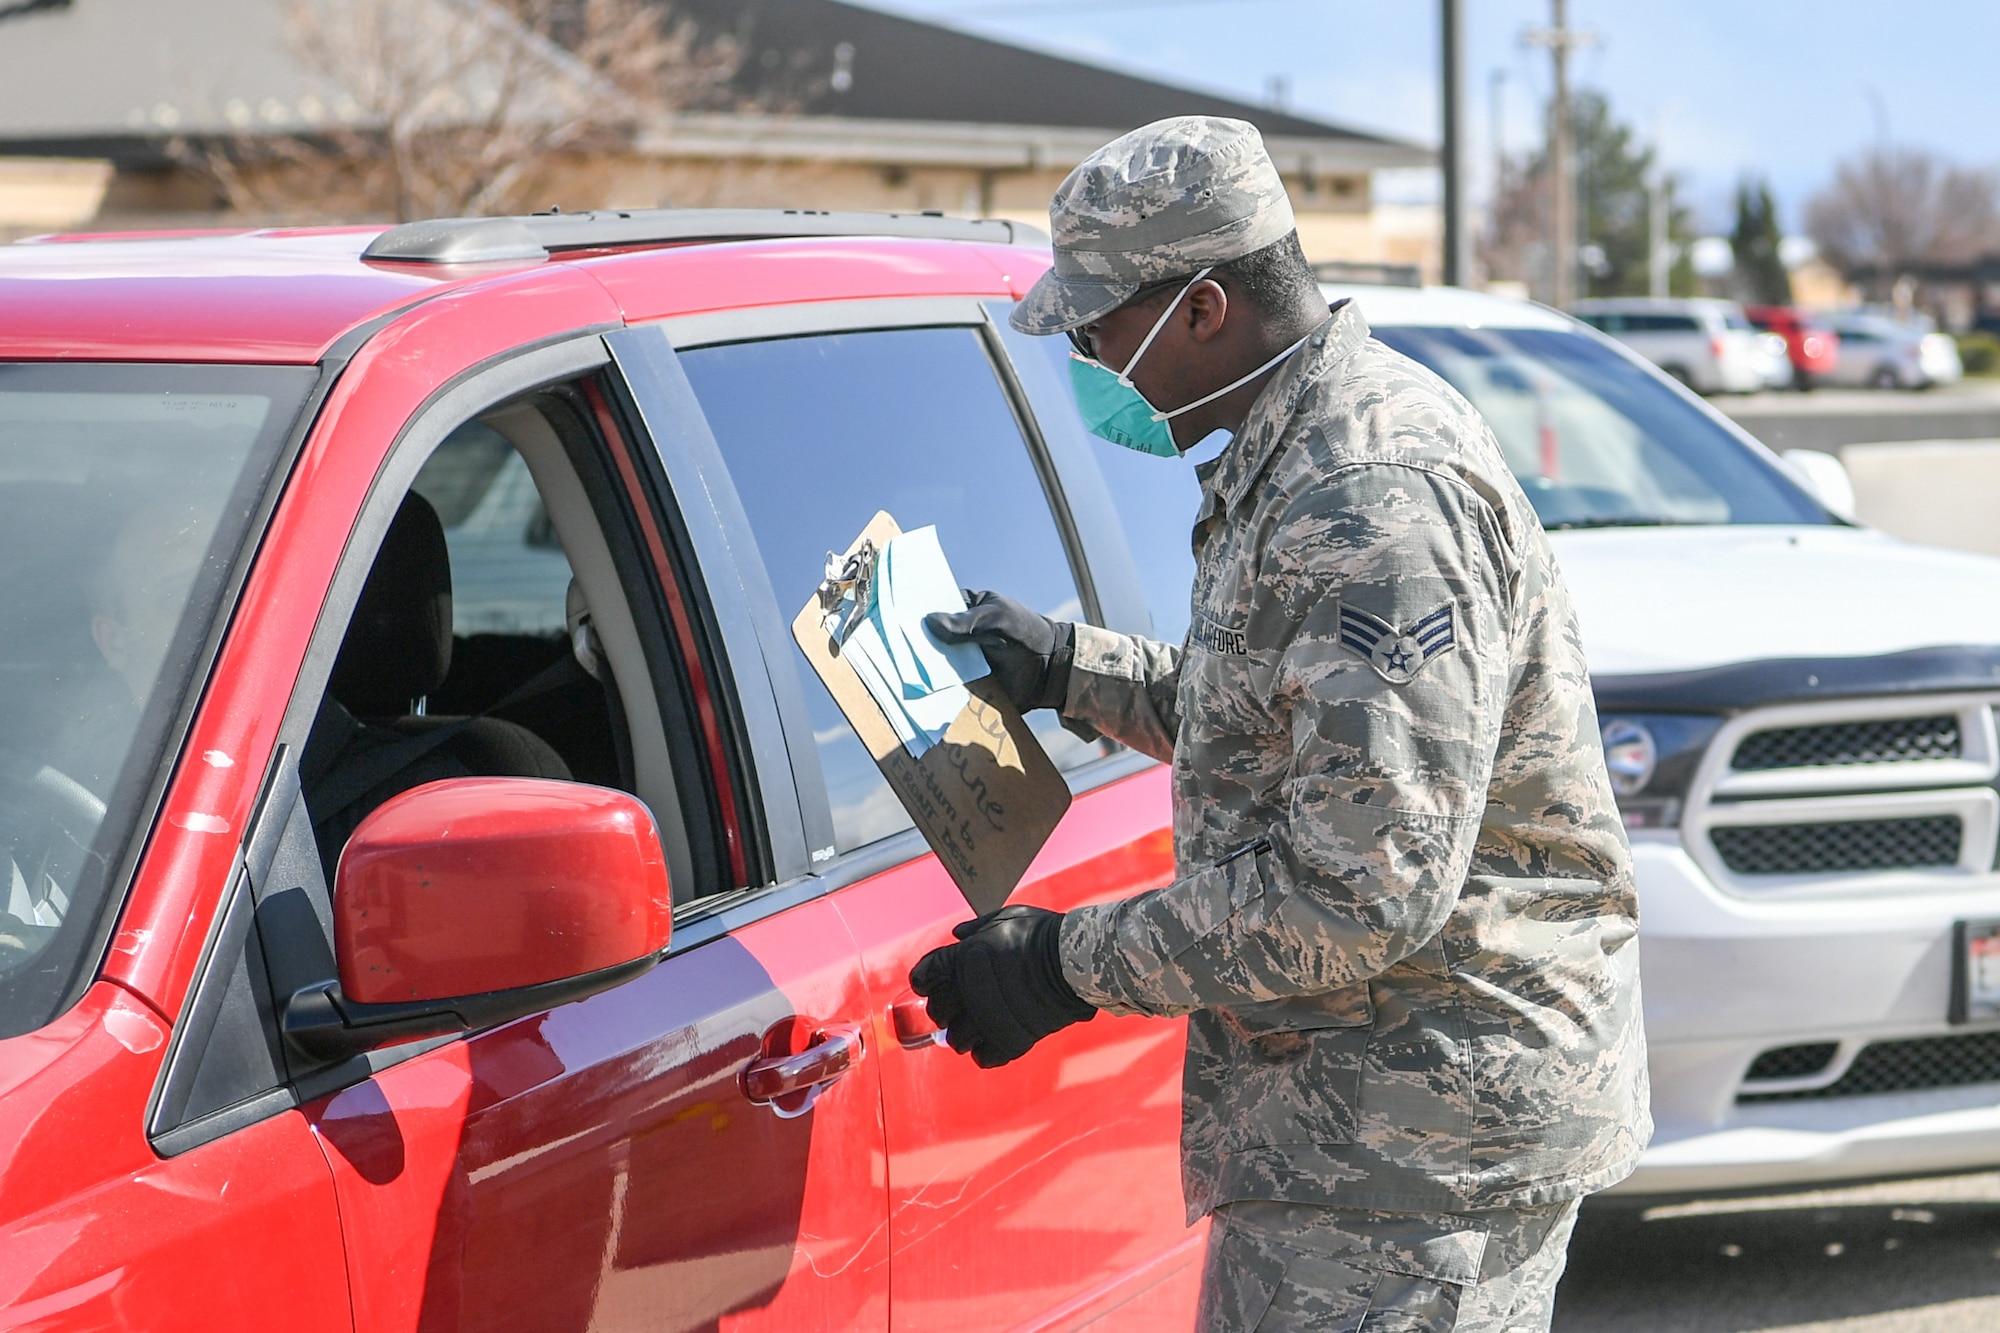 Senior Airman Elijah Thompkins, 75th Medical Group, consults with a beneficiary March 23, 2020, at Hill Air Force Base, Utah. The 75th Medical Group Satellite Pharmacy is providing curbside service until further notice in front of the Base Exchange shopping center in support of social distancing recommendations and to increase efforts to mitigate further spread of the novel coronavirus.(U.S. Air Force photo by Cynthia Griggs)